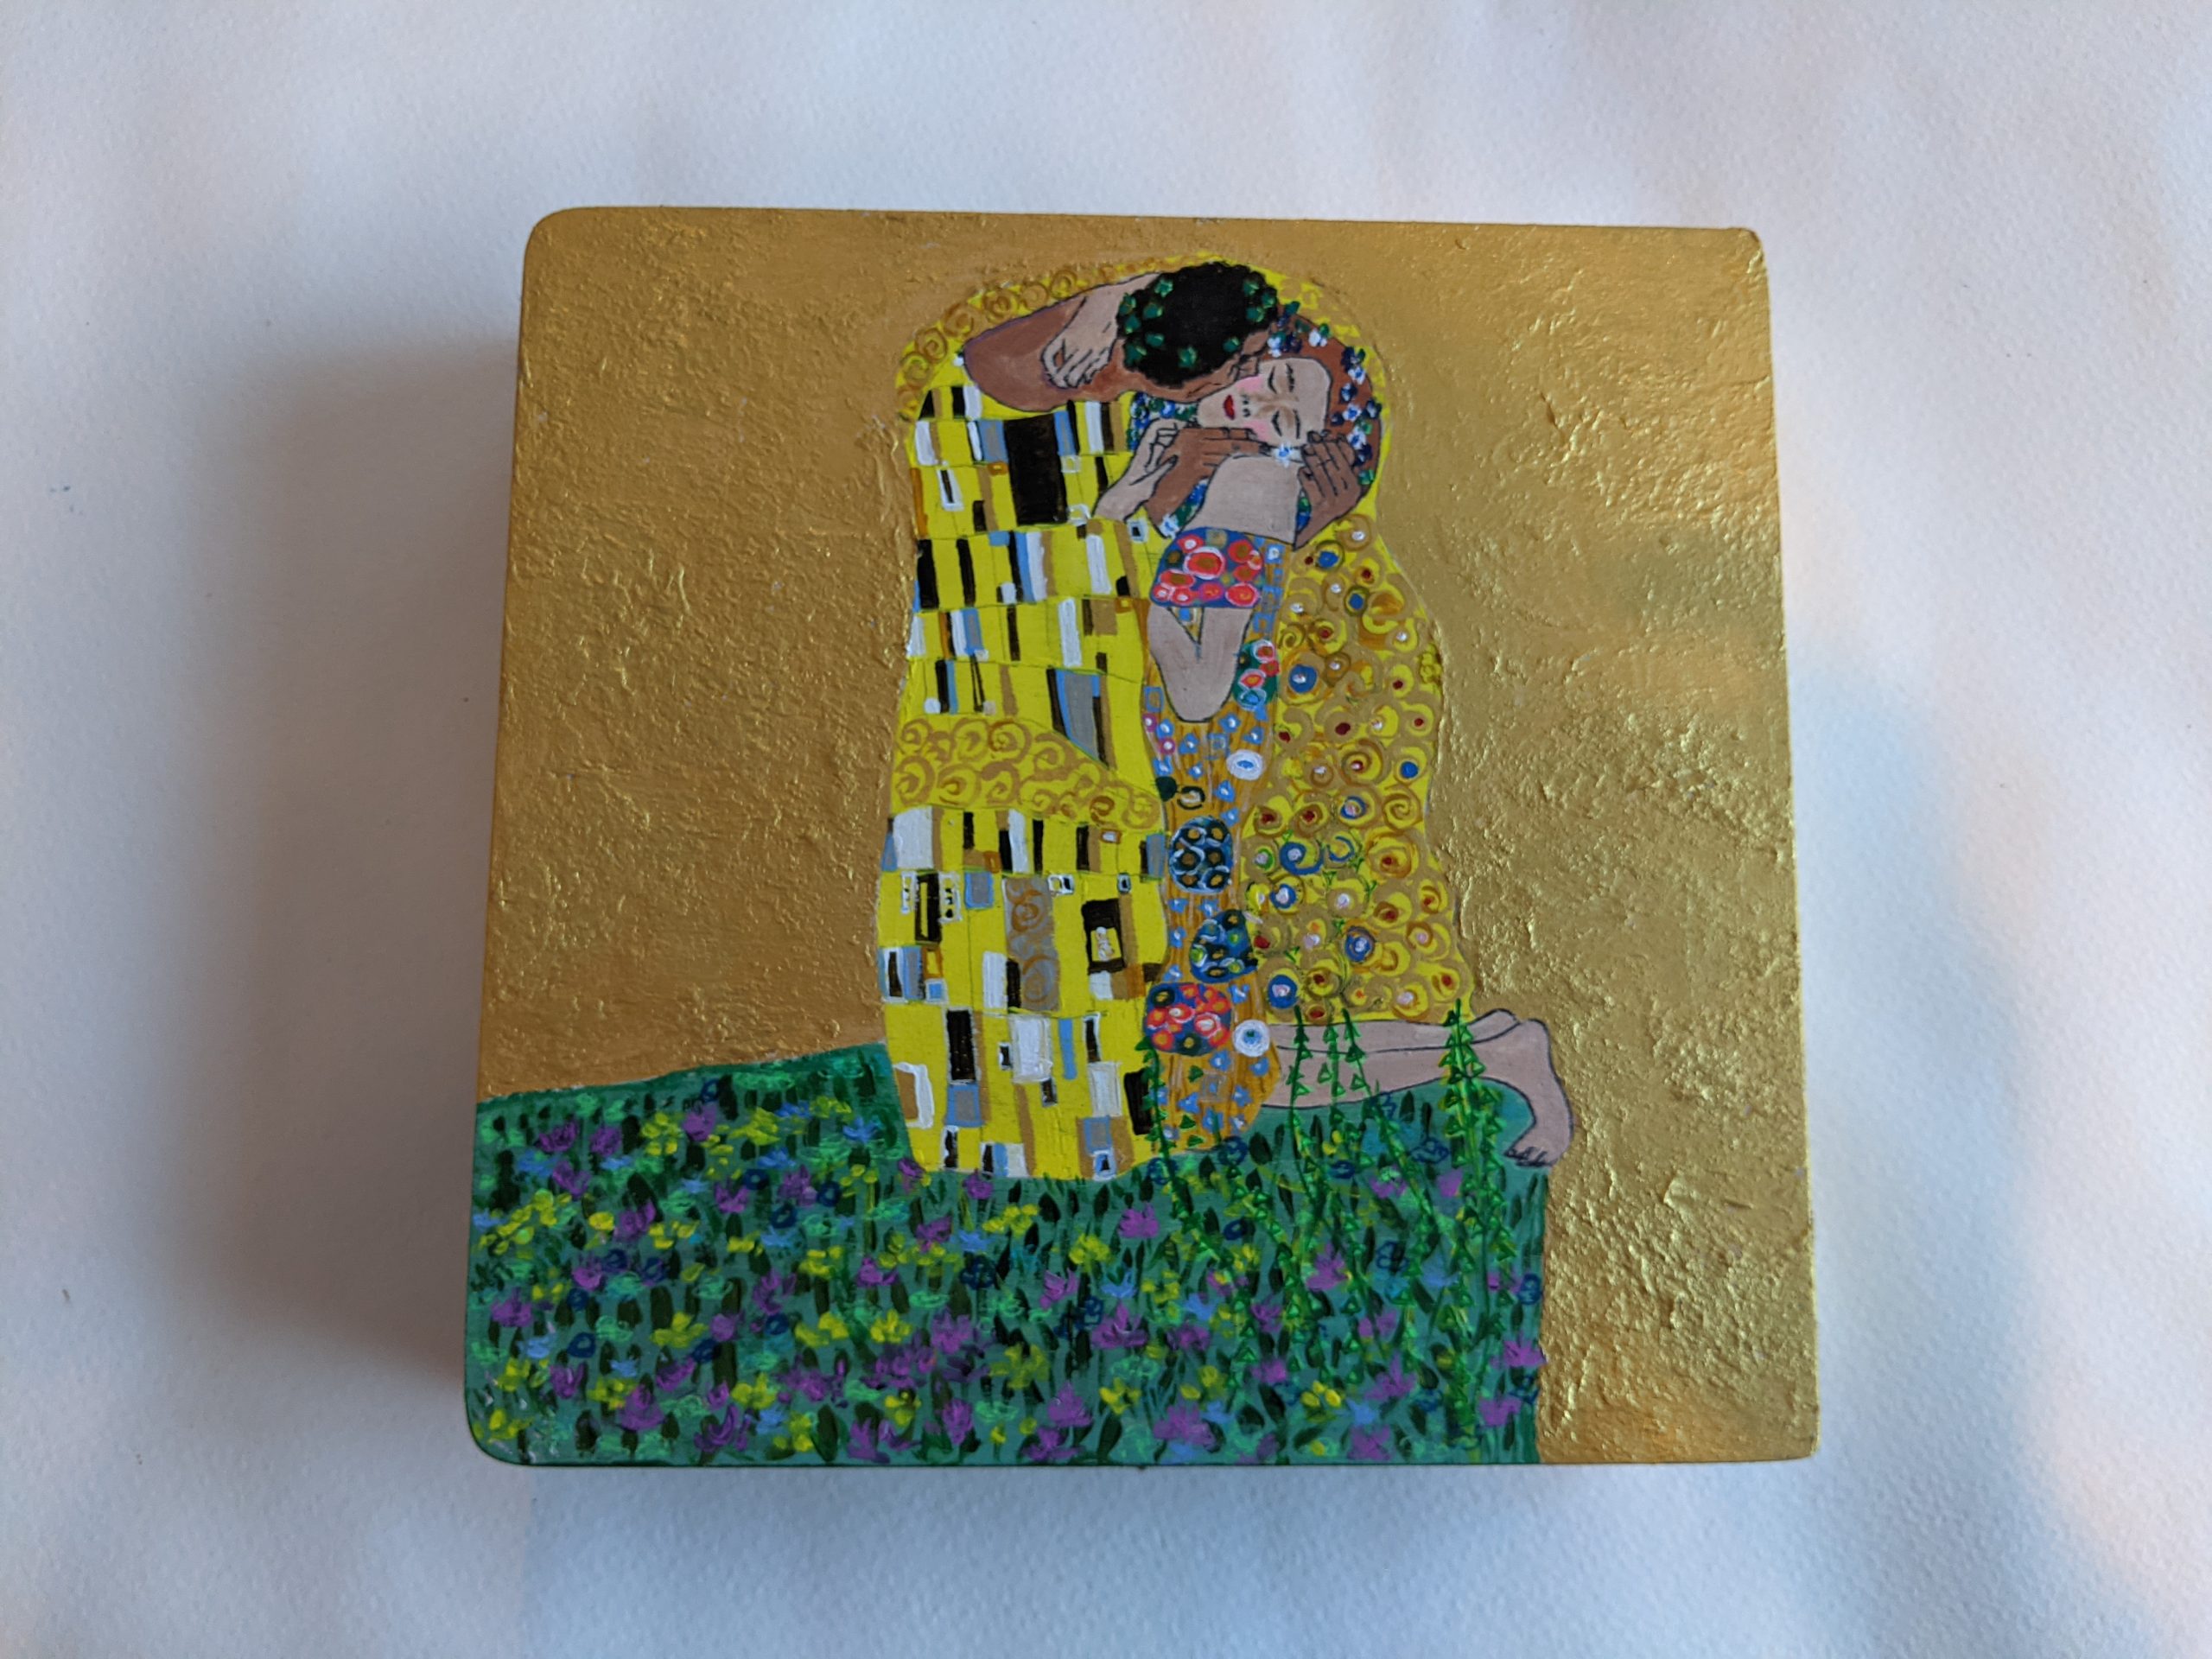 One of a Kind Valentine’s Day Gift – “The Kiss” Klimt Painting Chocolate Box by Fan Stanbrough